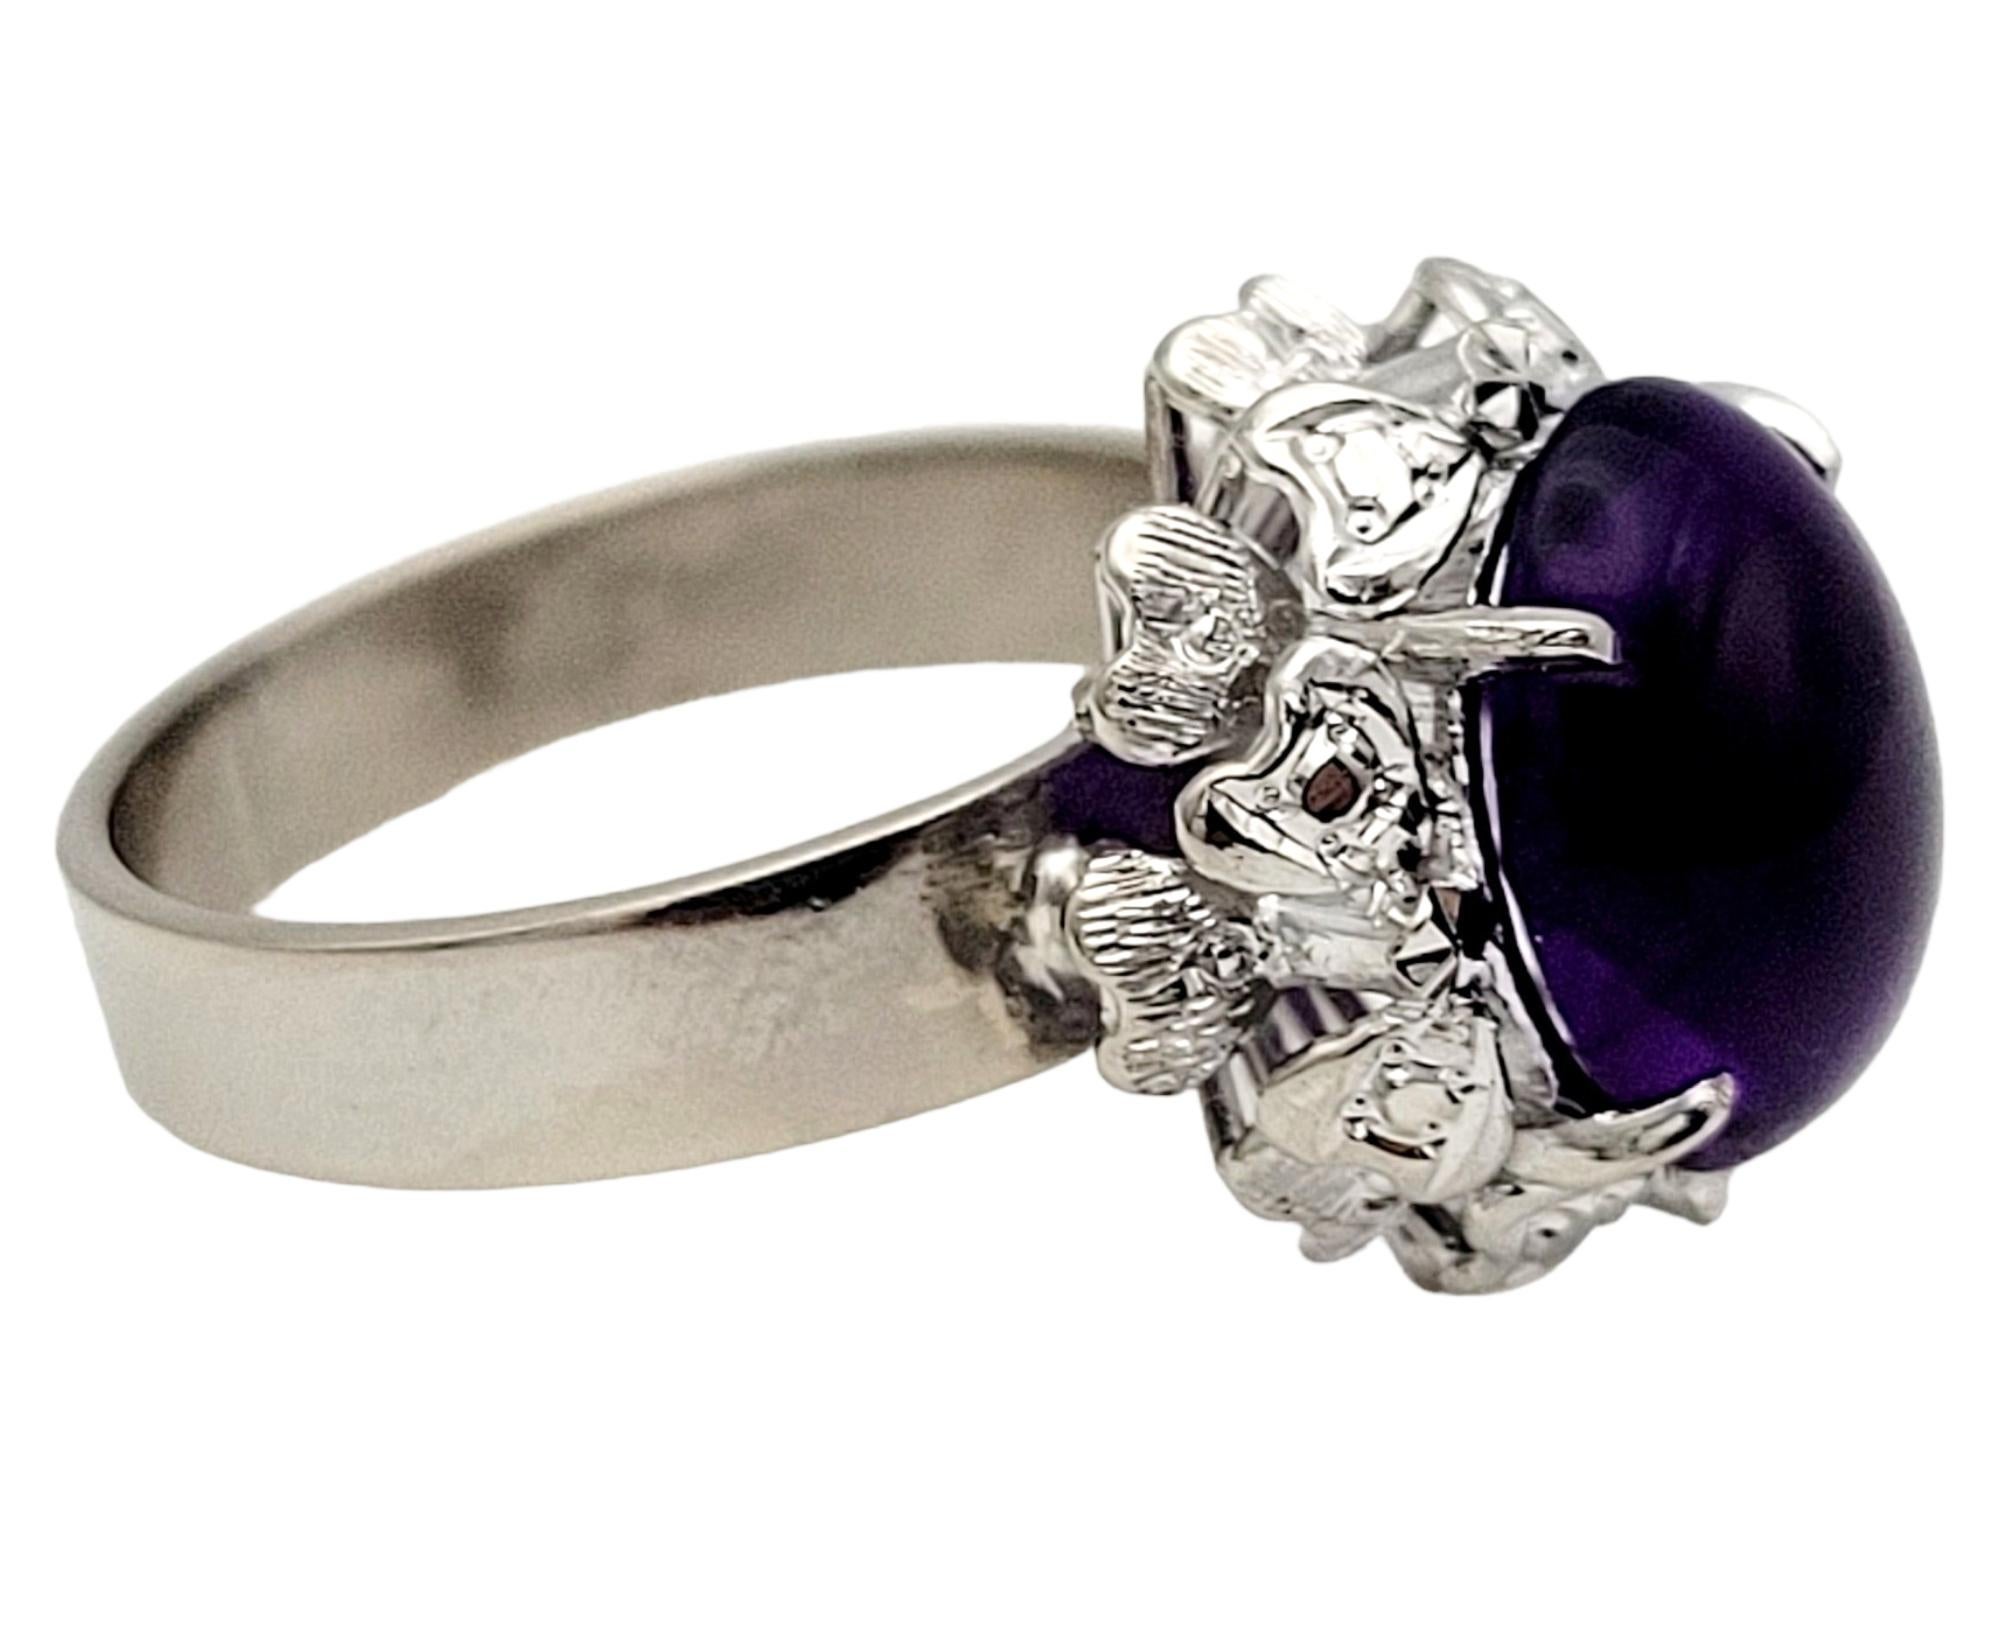 4.00 Carat Oval Cabochon Amethyst Solitaire 10 Karat White Gold Cocktail Ring  In Good Condition For Sale In Scottsdale, AZ